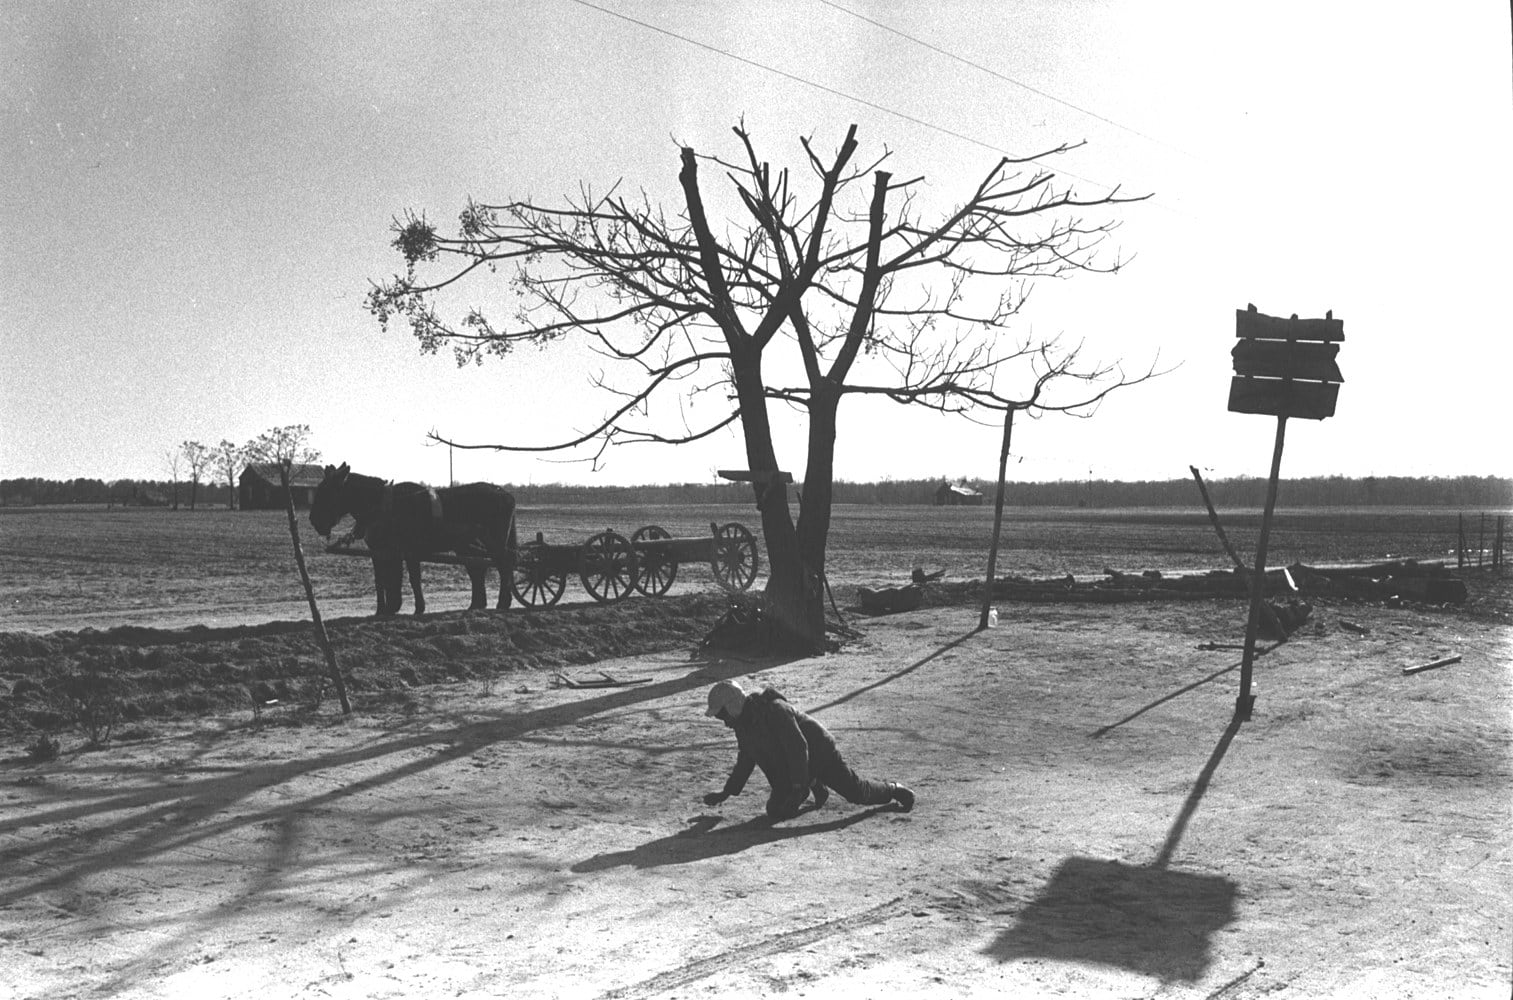 Constantine Manos, Untitled, Sharecroppers, South Carolina (child on ground, basketball hoop, mule), 1965